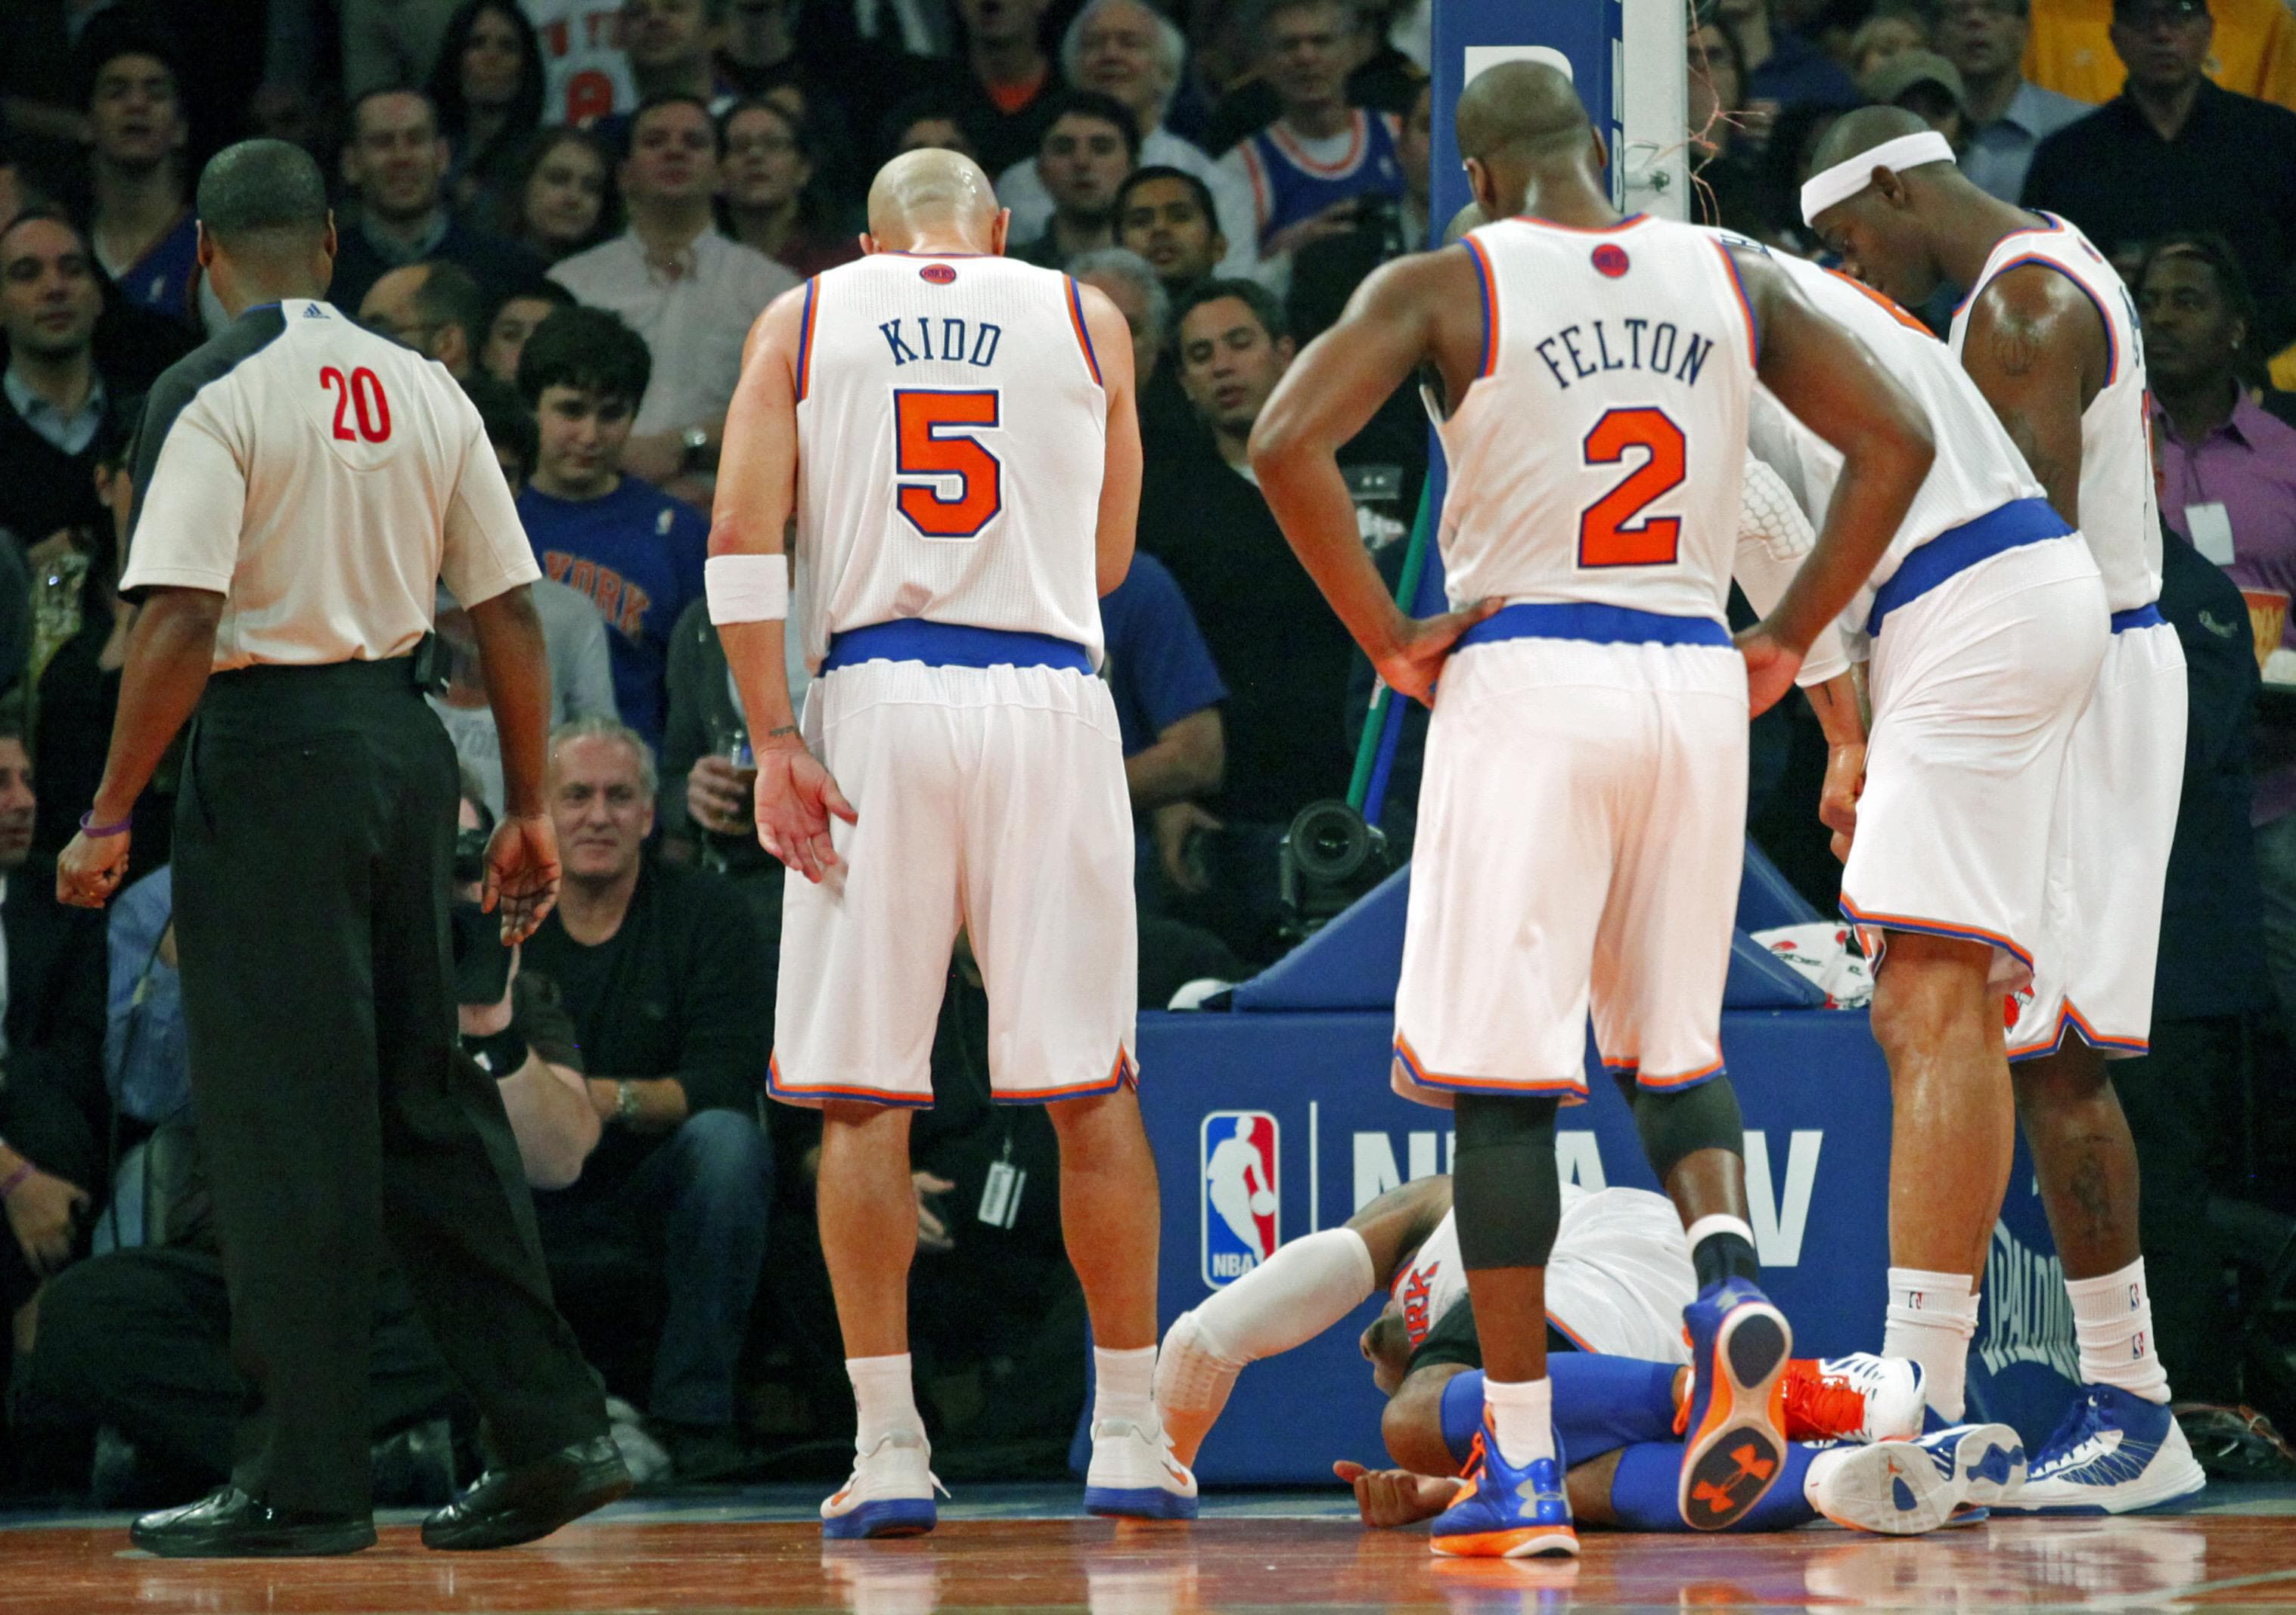 25 reasons to love watching the New York Knicks at Madison Square Garden